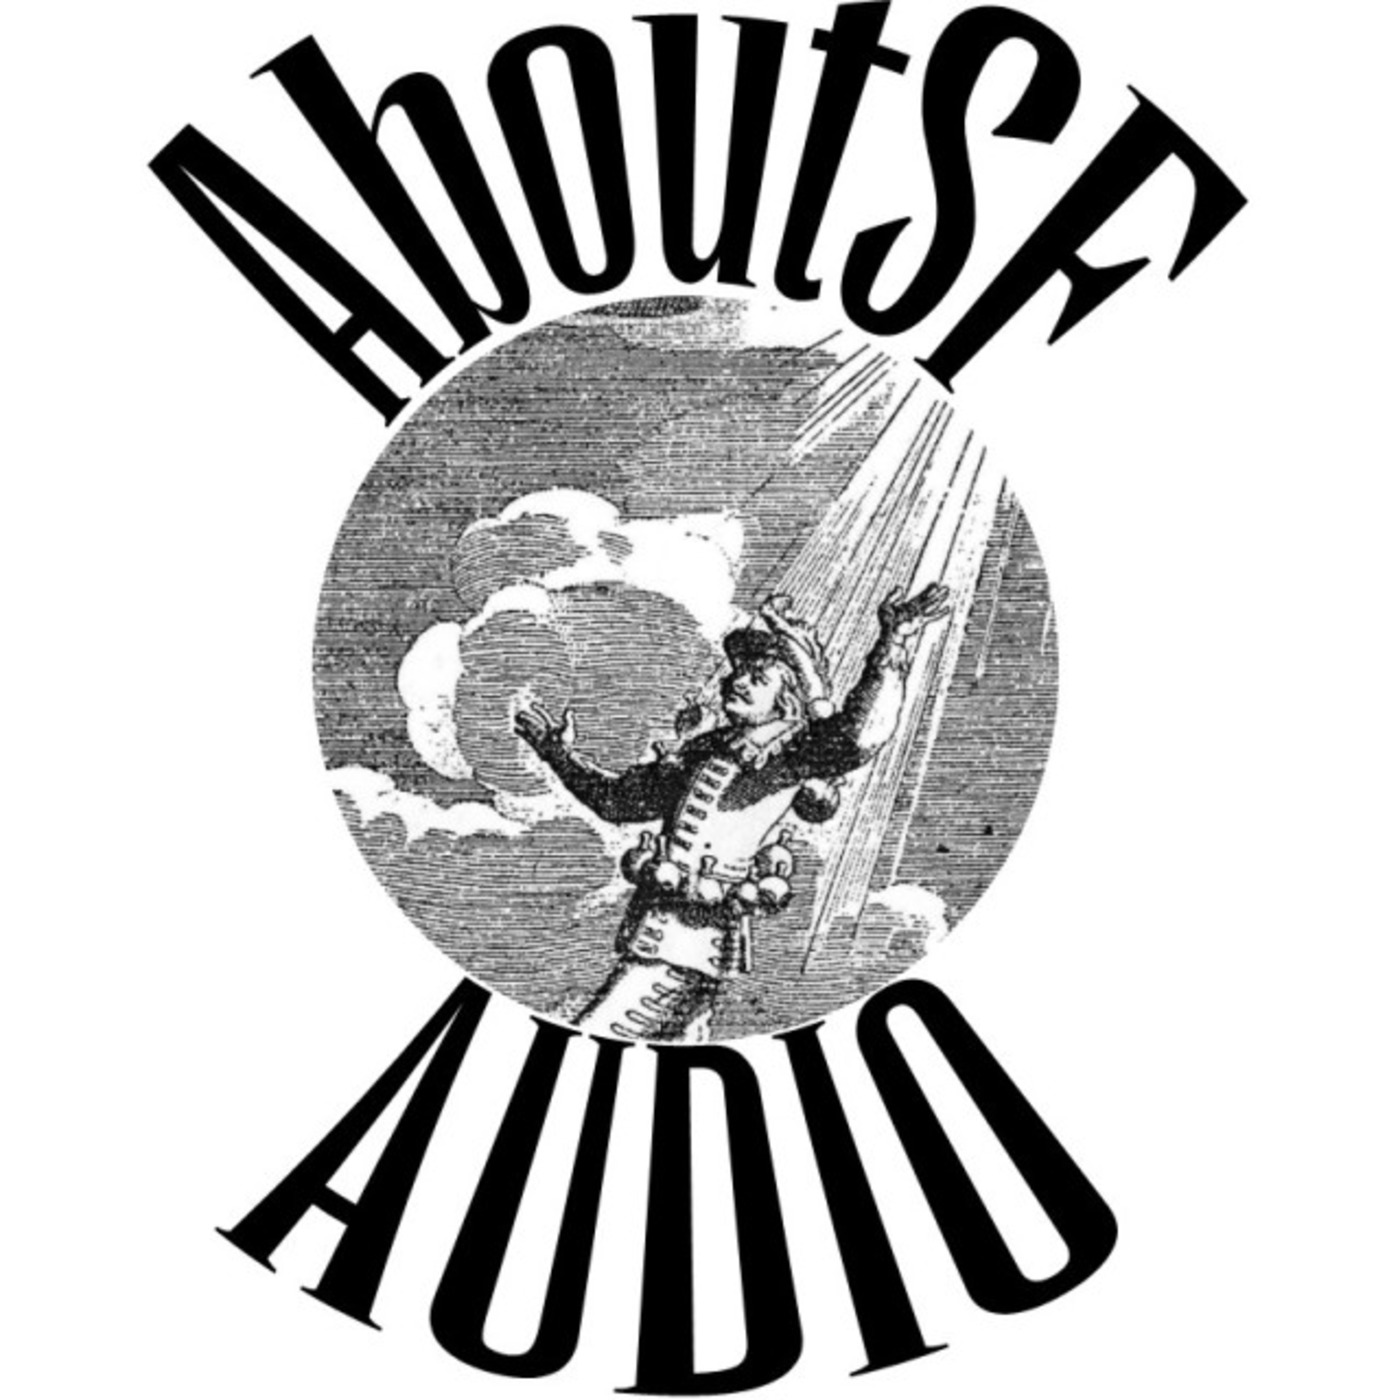 AboutSF AUDIO